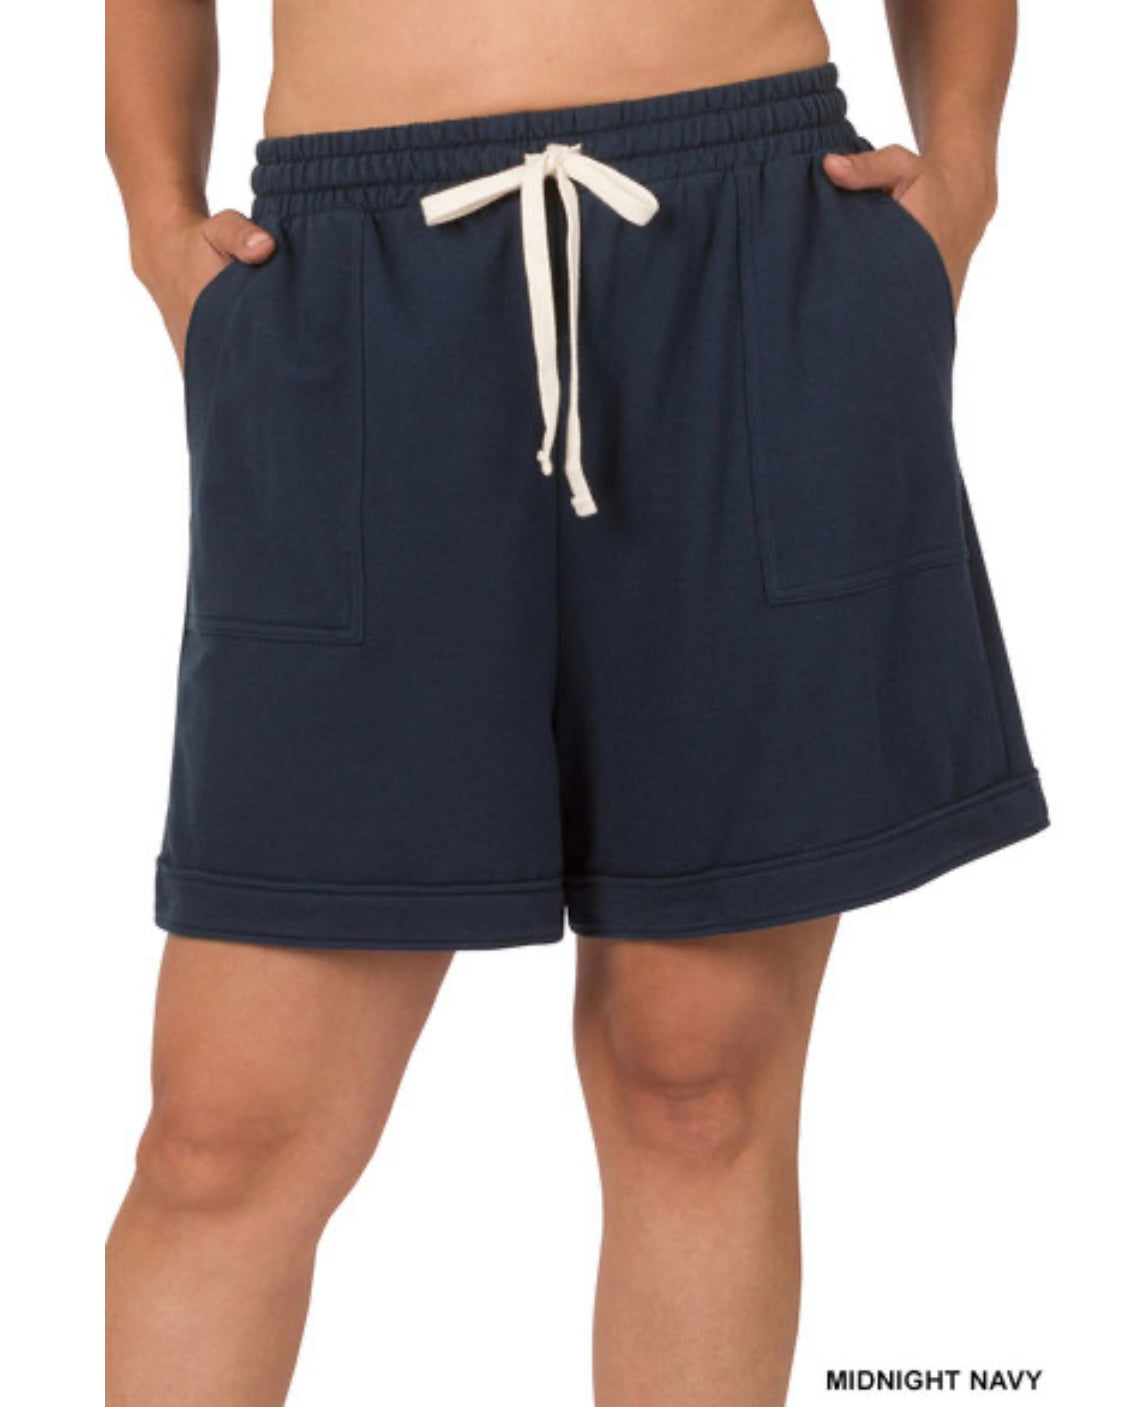 French Terry Drawstring Shorts - 2 Colors!